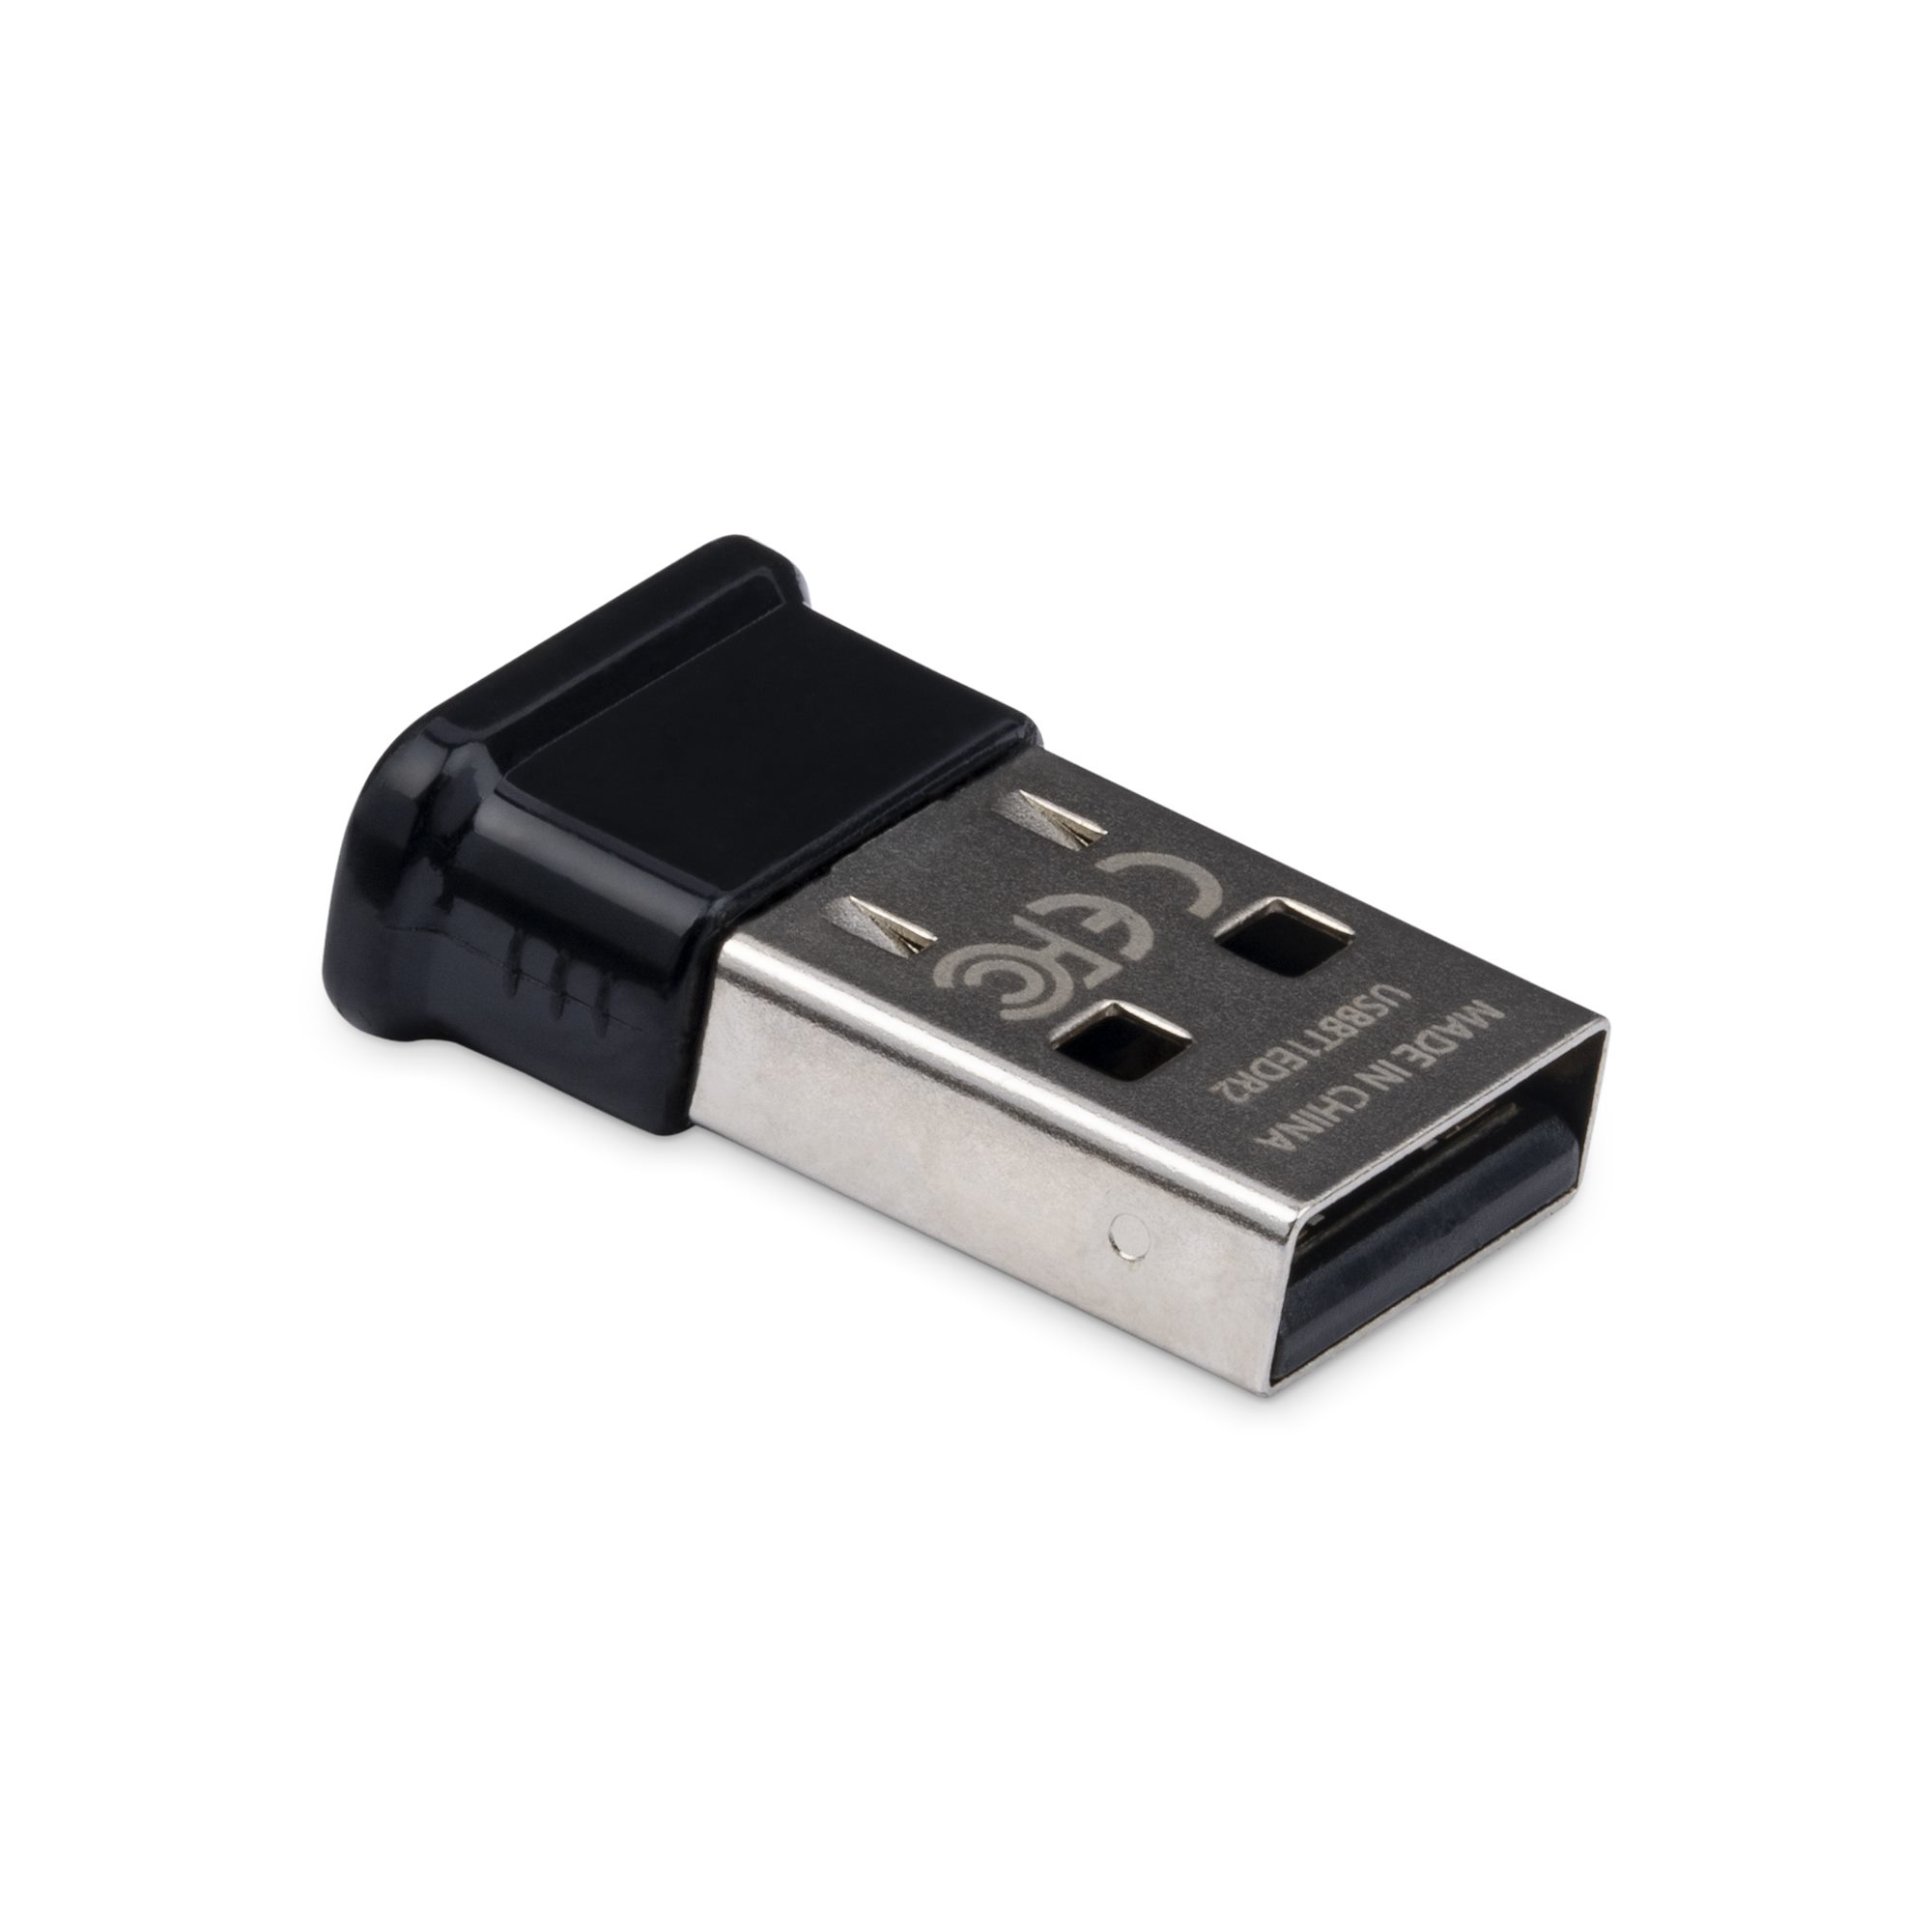 USB Bluetooth Adapter, Bluetooth 2.0 technology for PC, Wireless